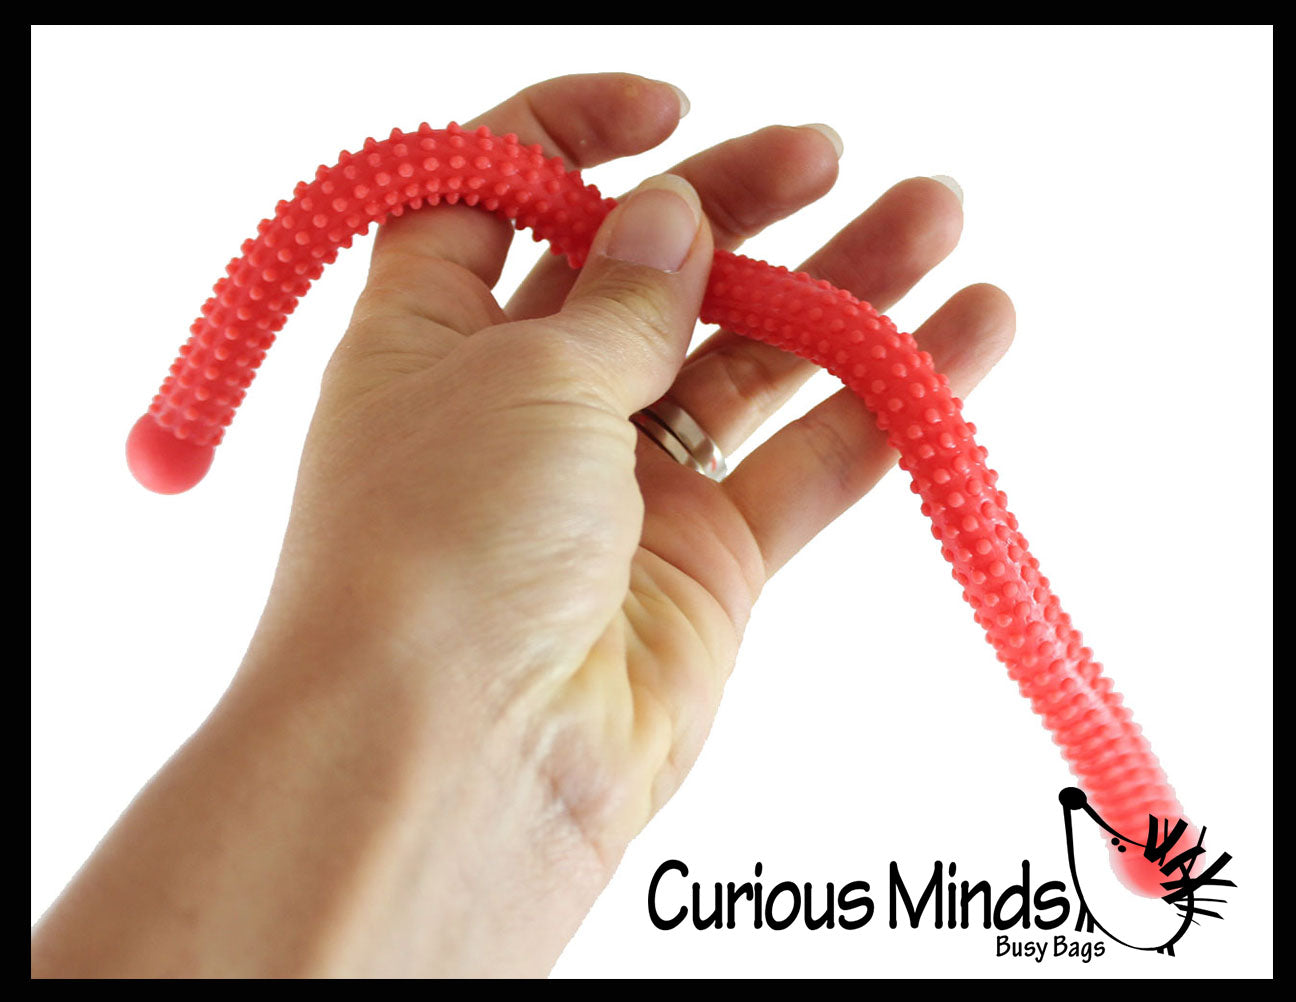 LAST CHANCE - LIMITED STOCK - Jumbo Textured Stretch String Fidget Toy